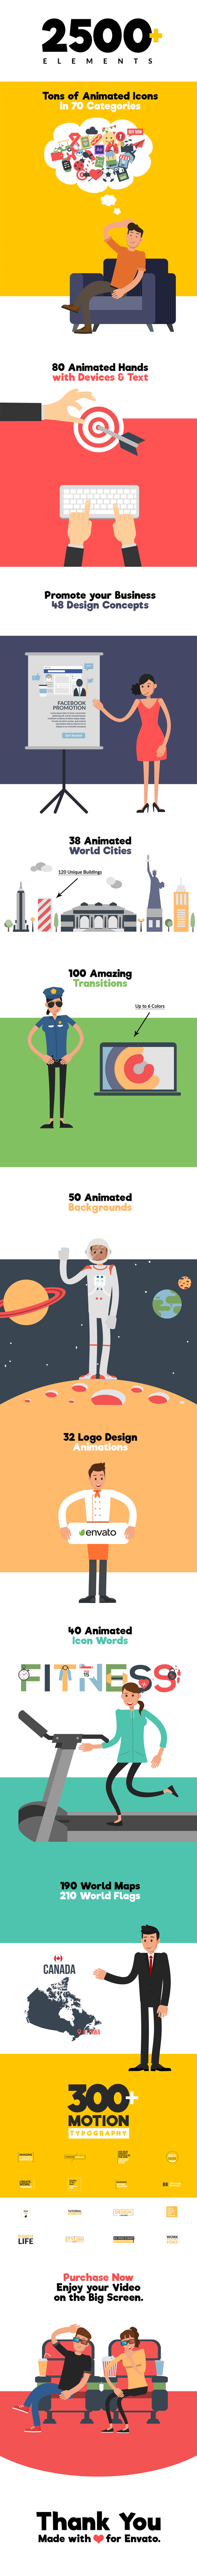 Story Now | Character Animation Explainer Toolkit - 8